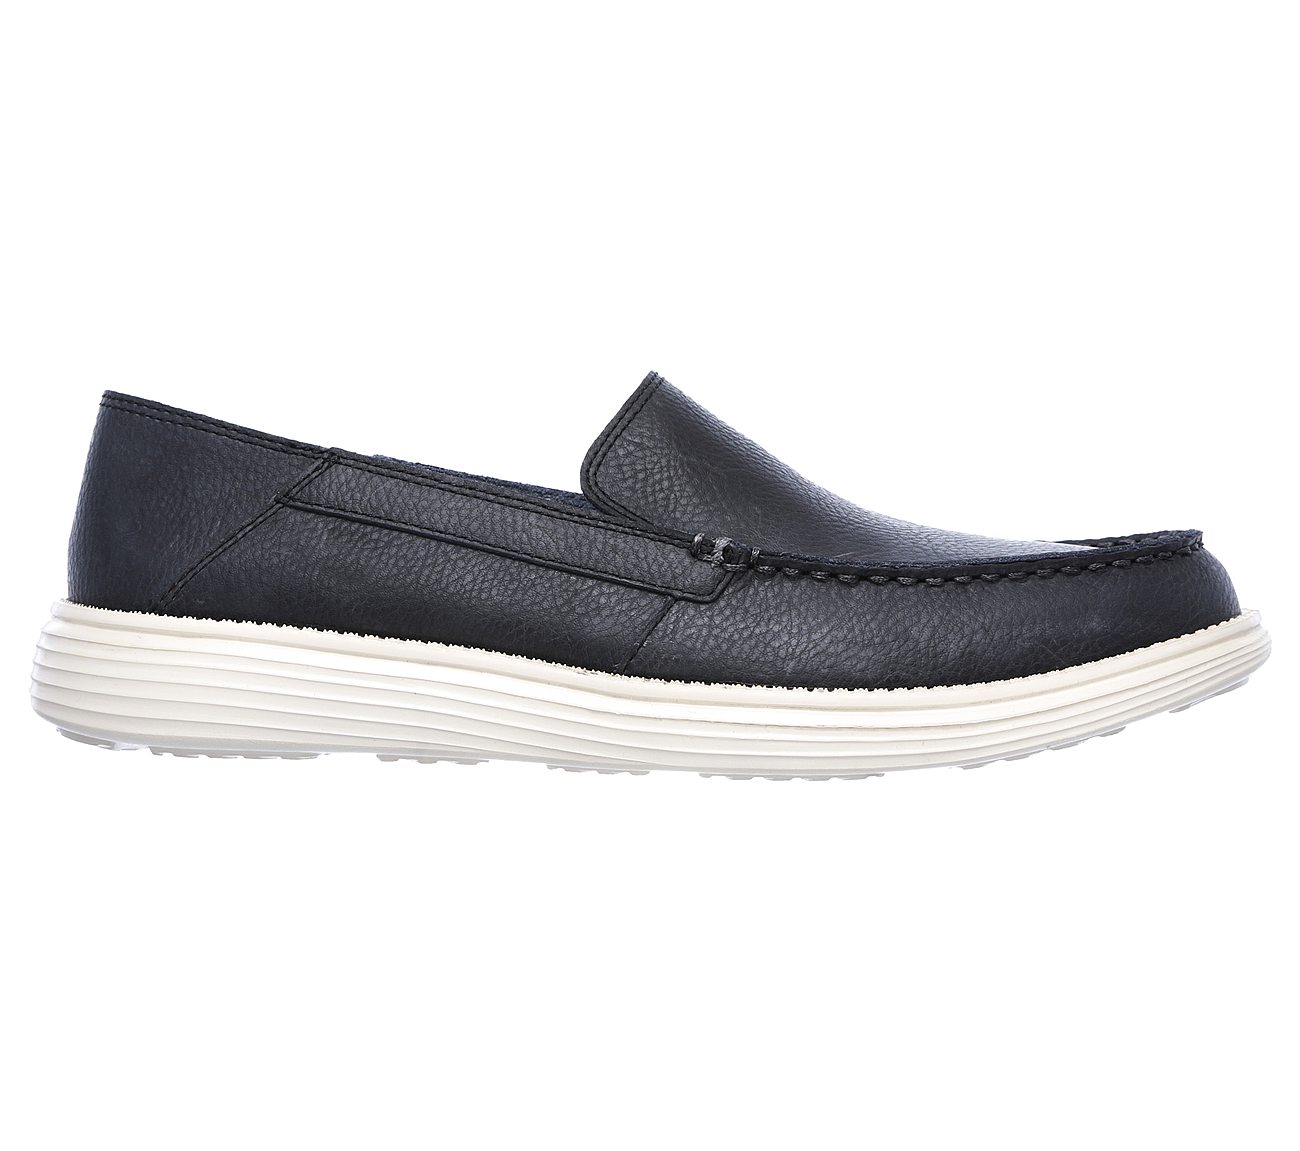 Breson SKECHERS Relaxed Fit Shoes